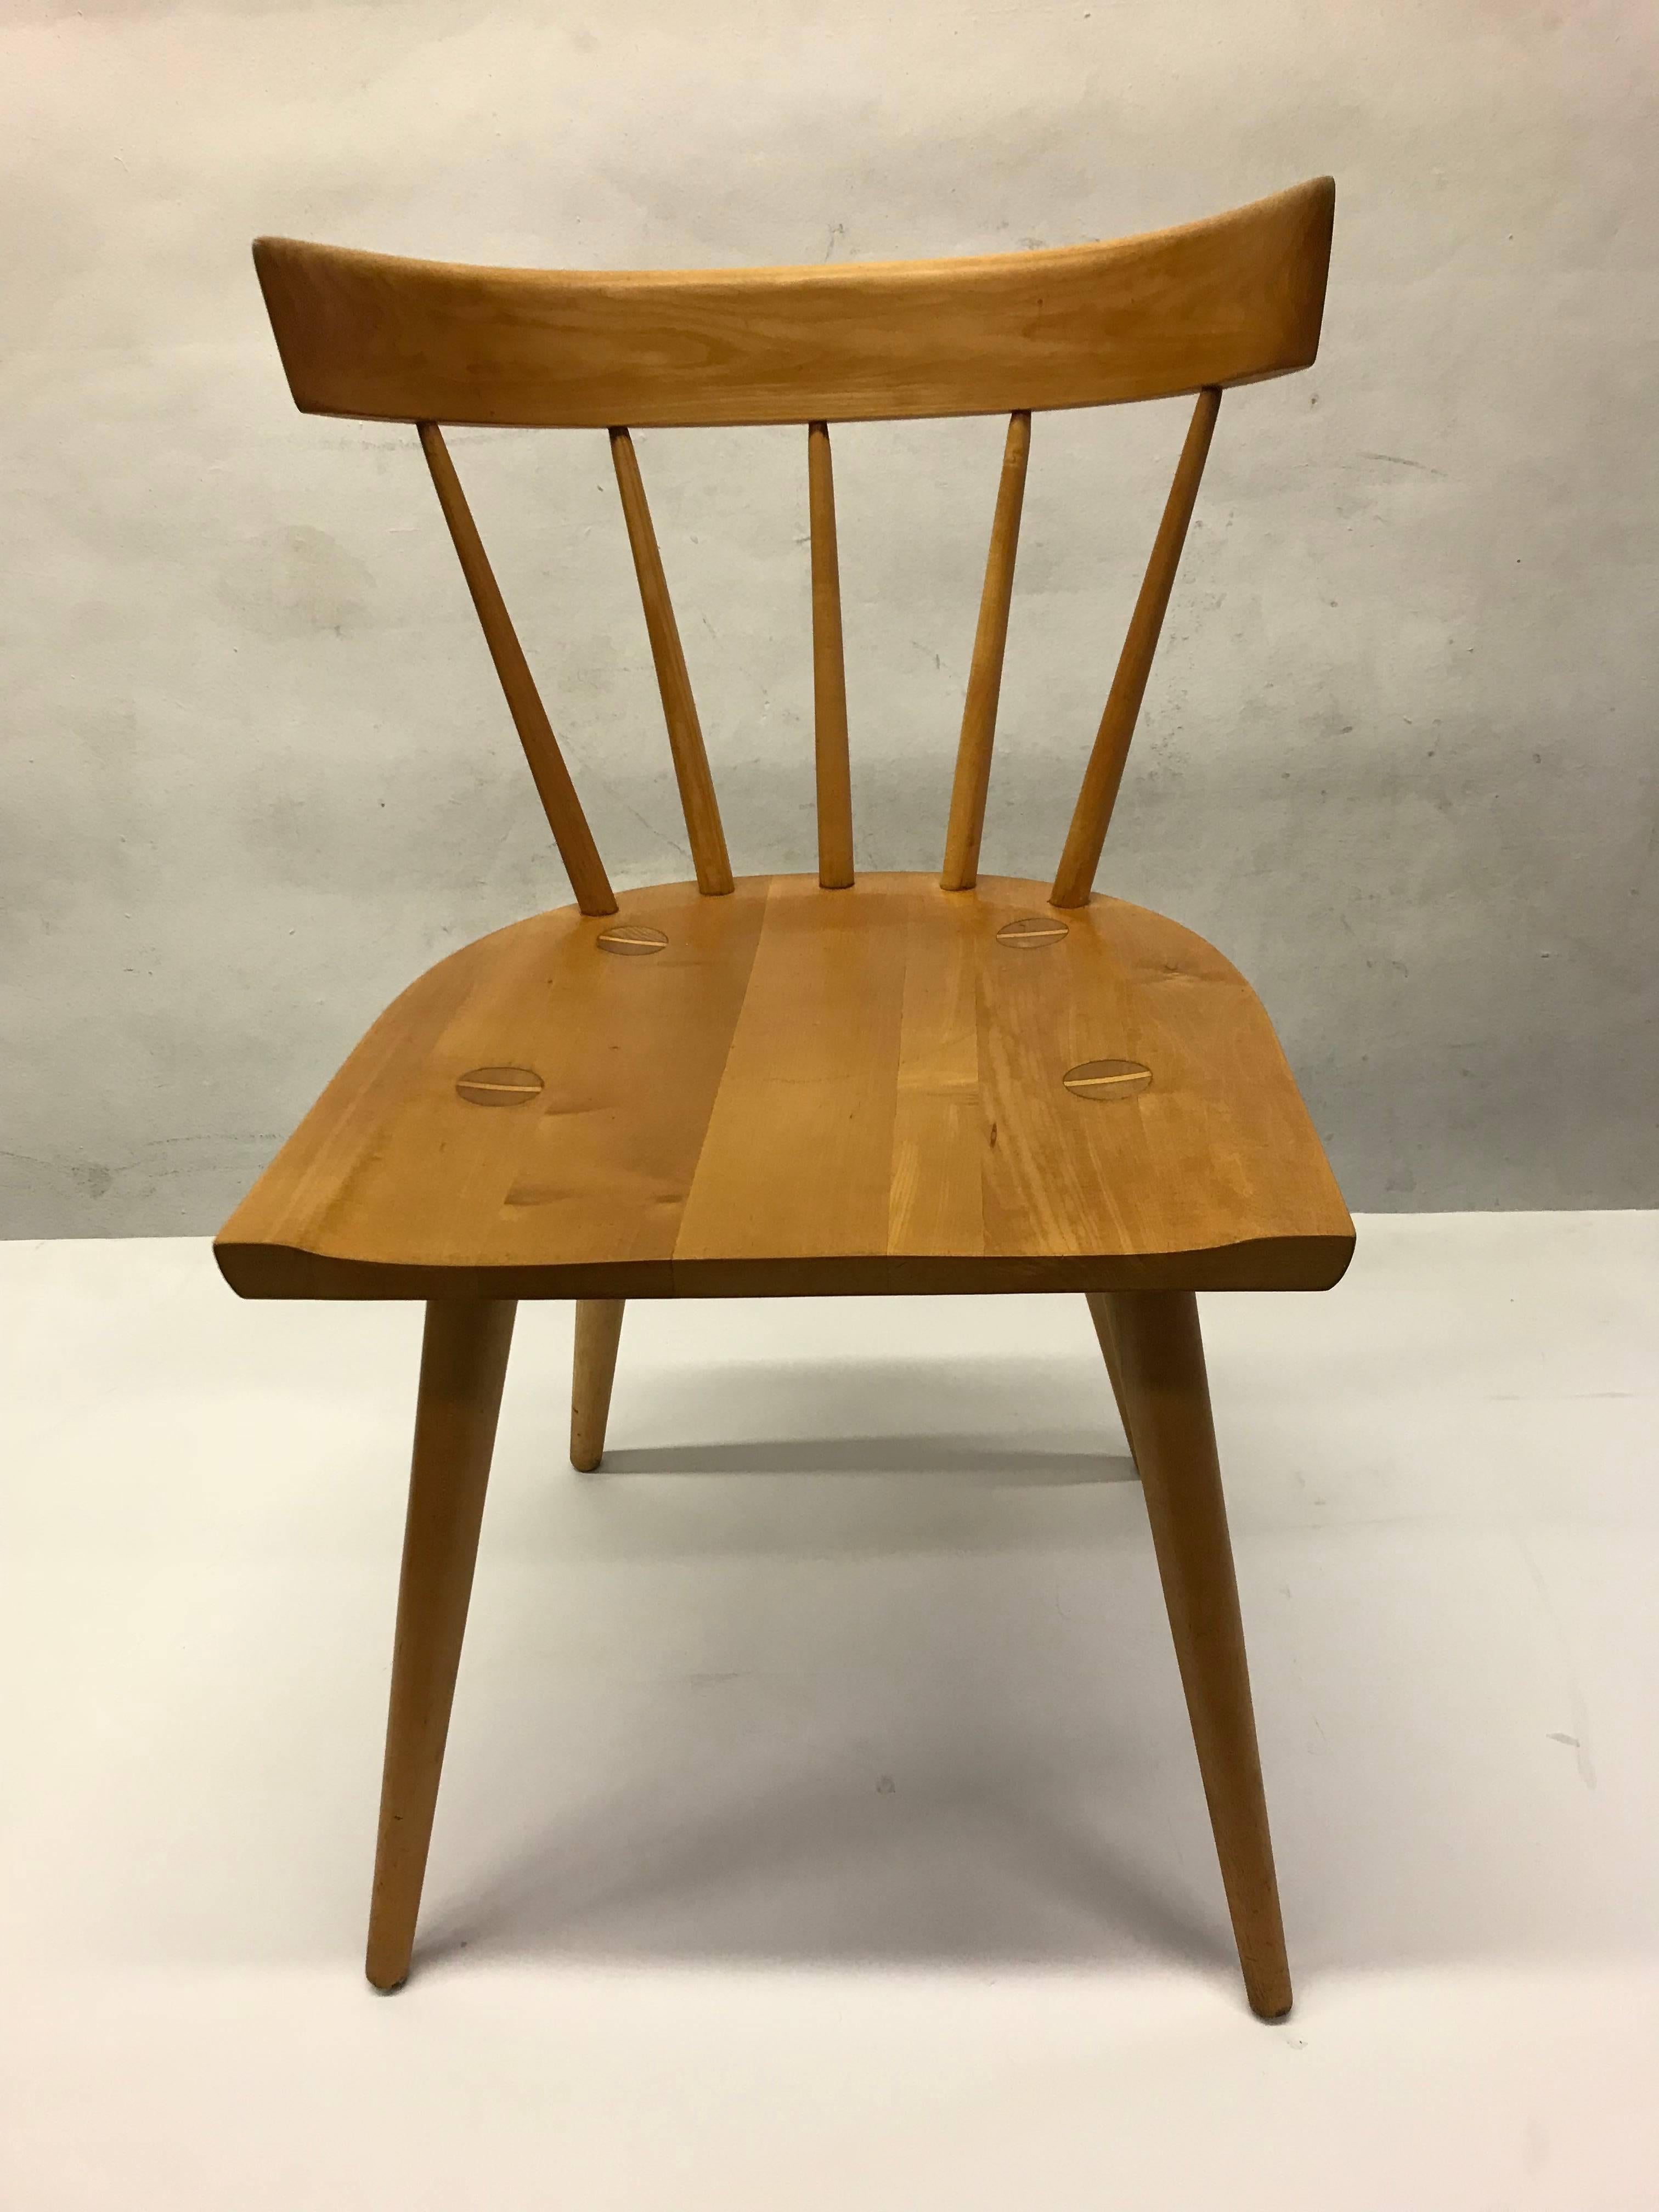 Midcentury solid maple chair designed by Paul McCobb.